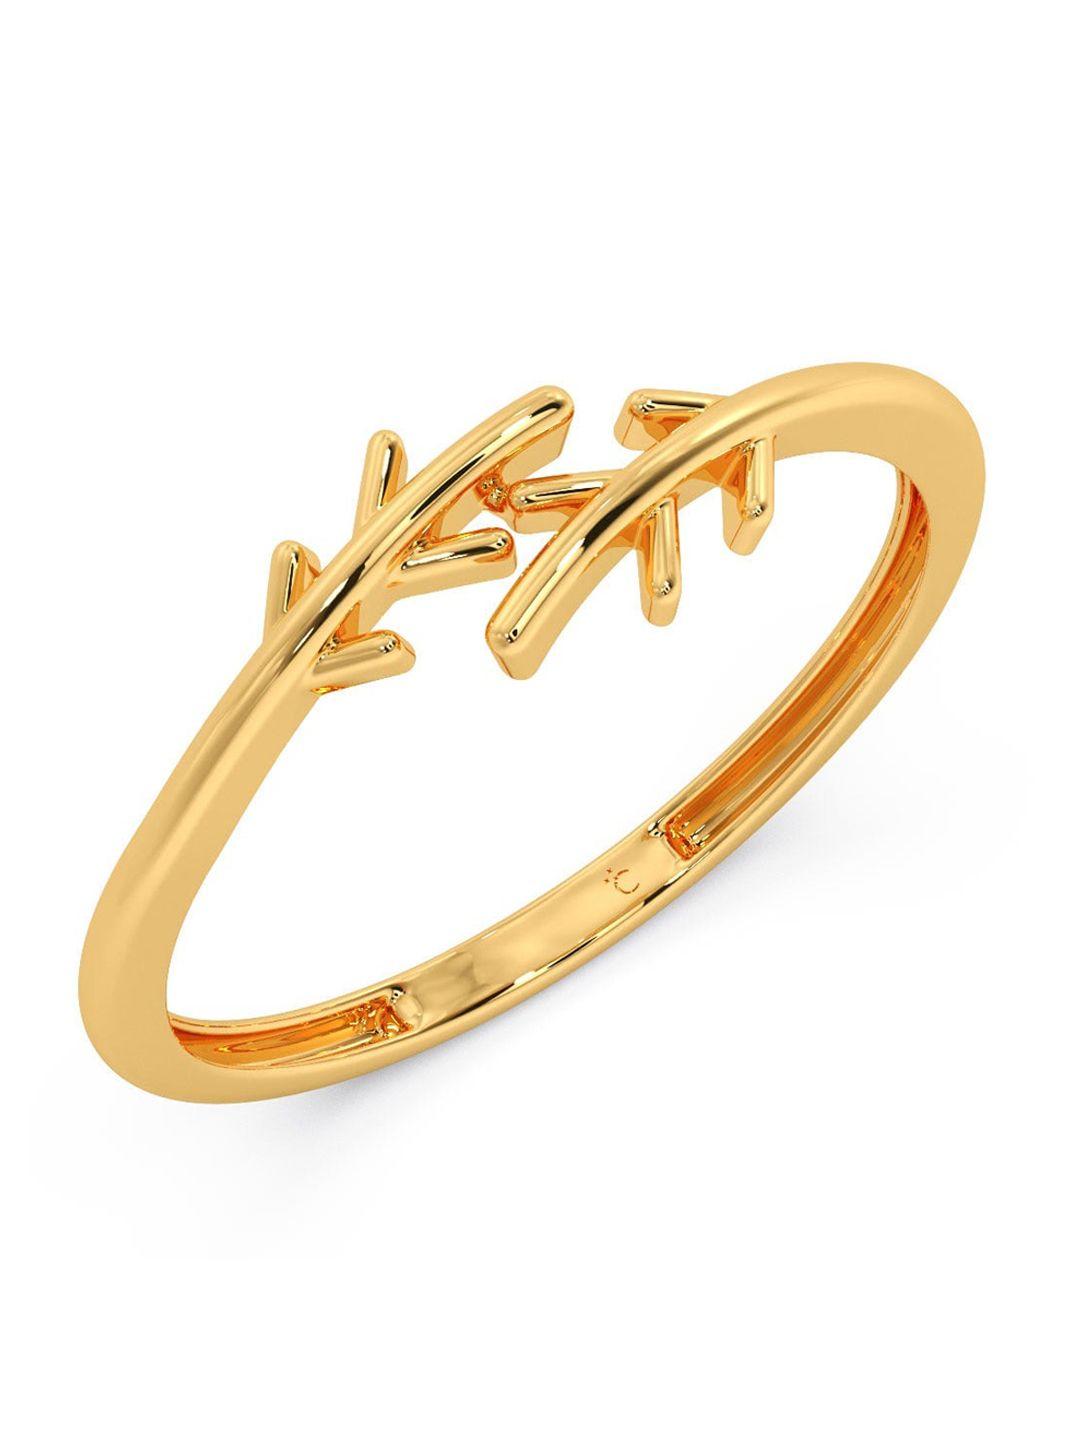 CANDERE A KALYAN JEWELLERS COMPANY 18KT Gold Ring-0.69gm